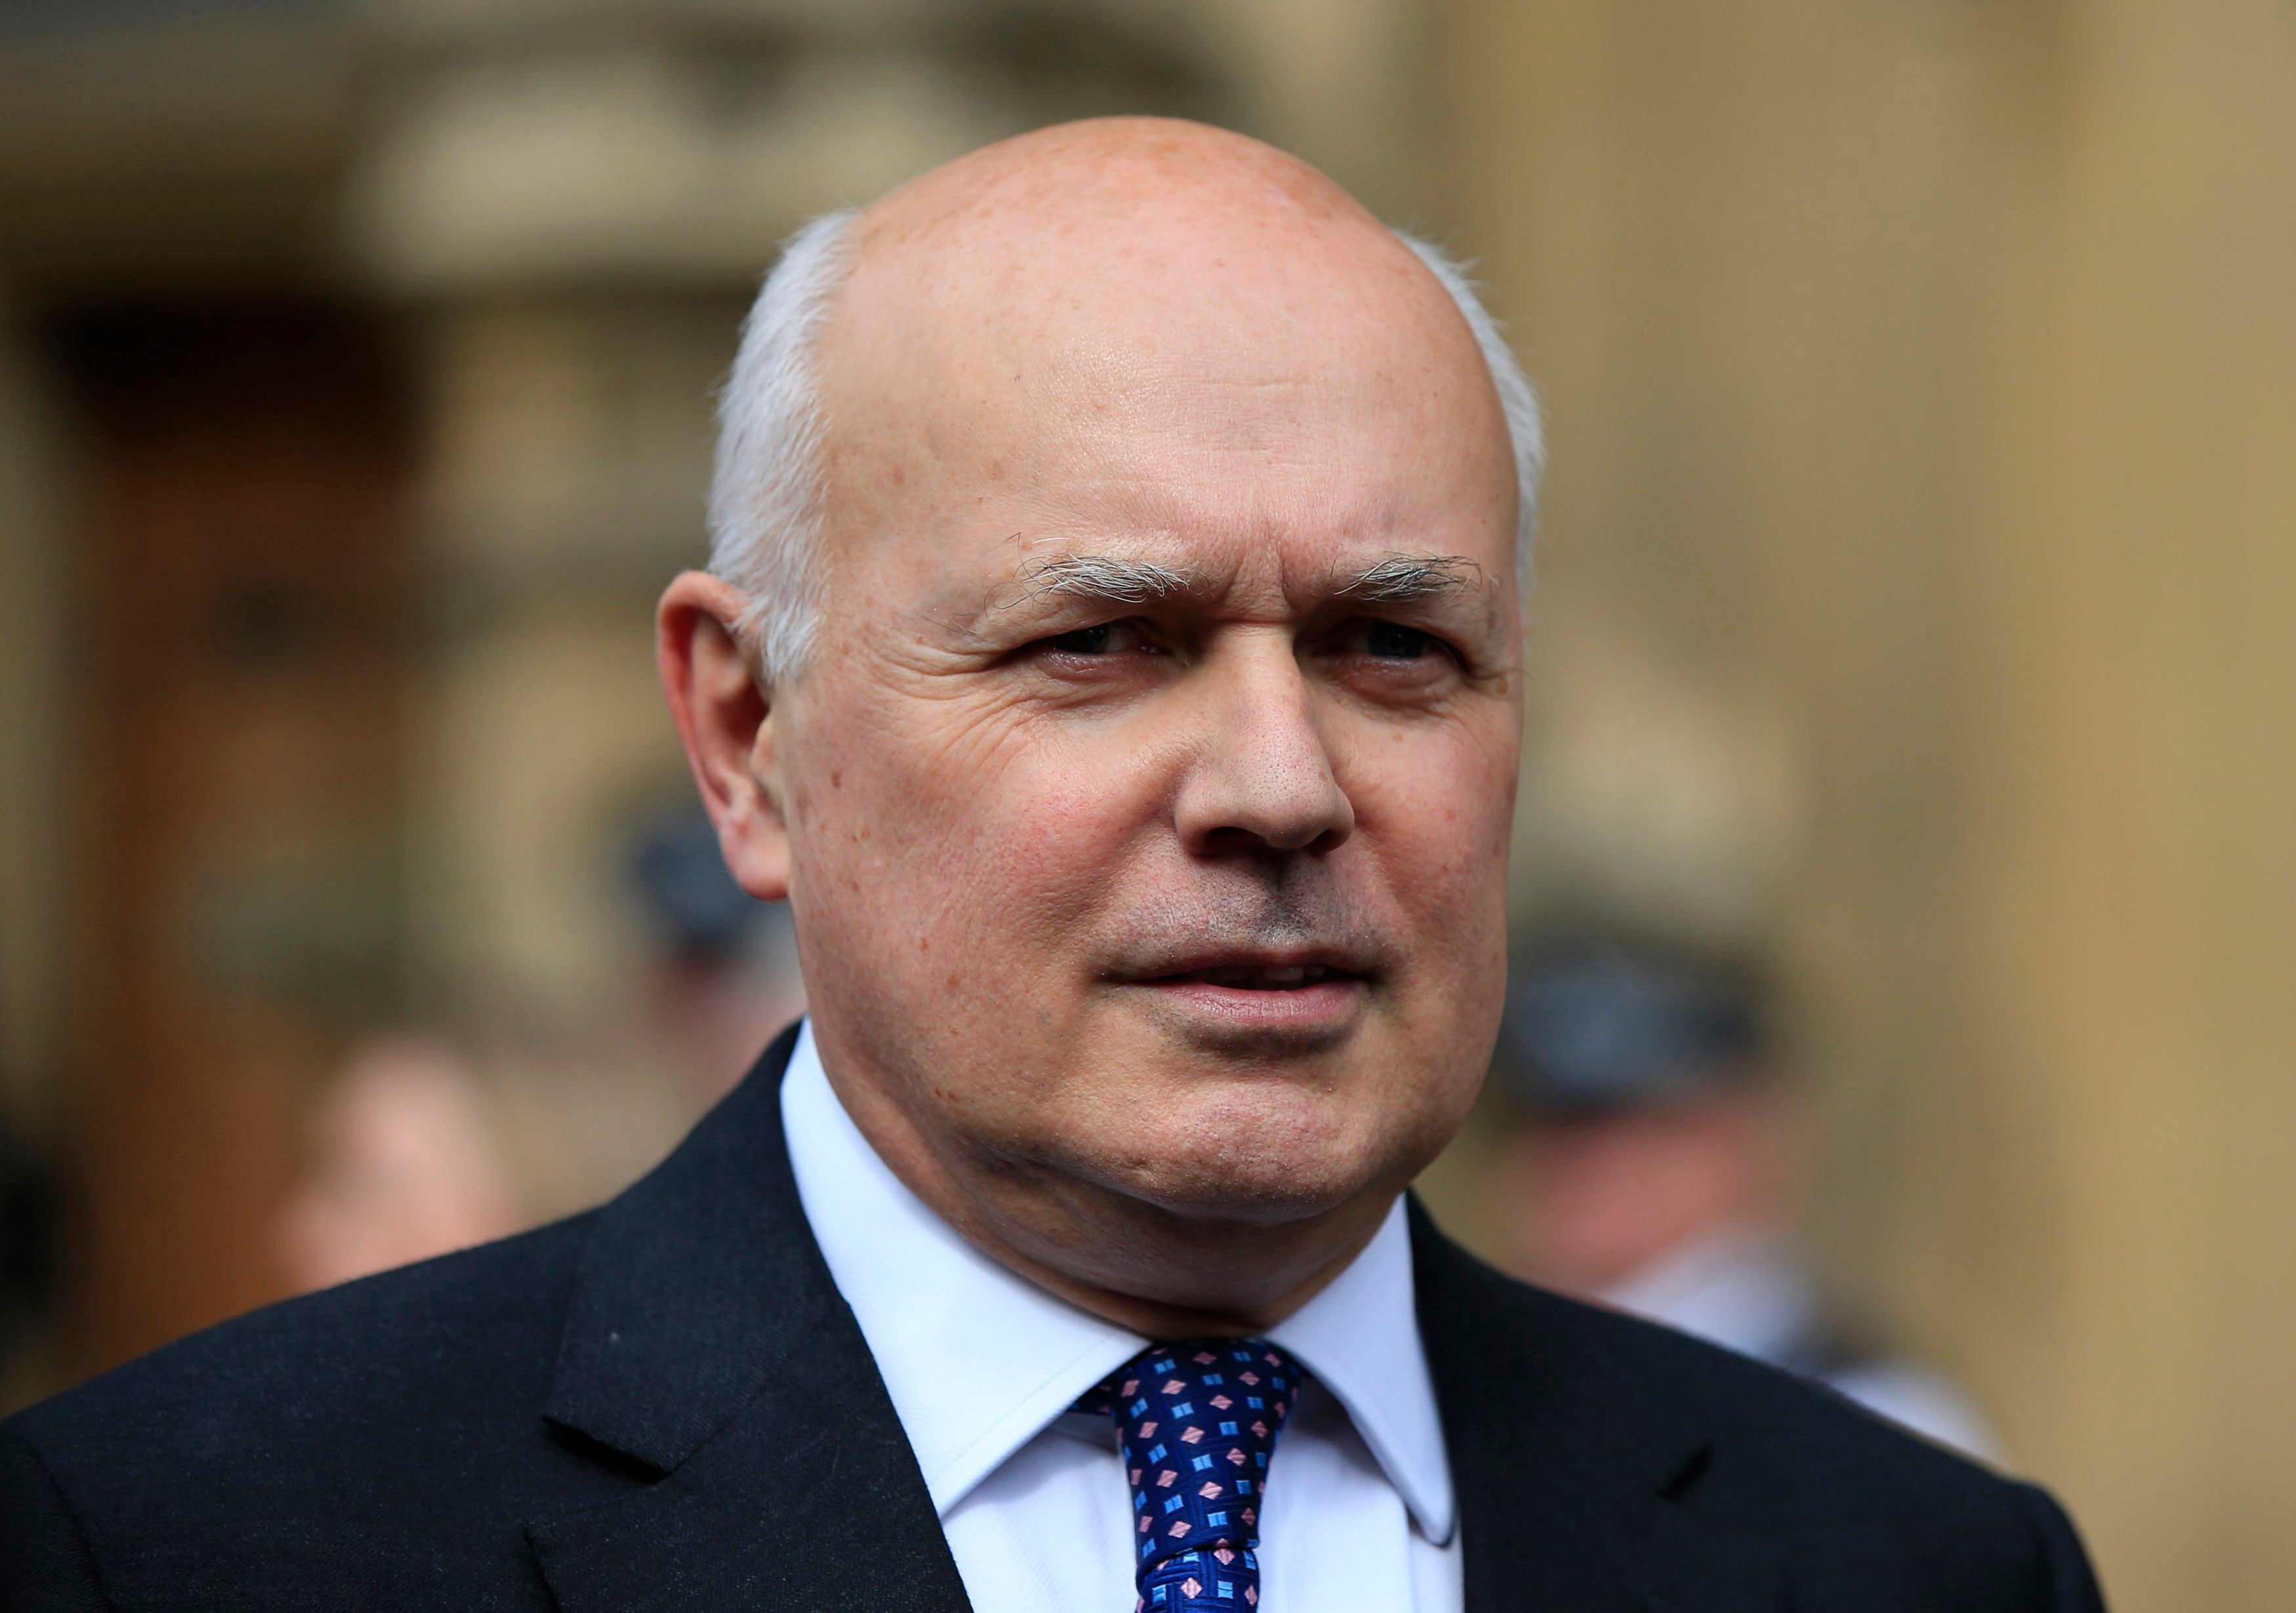 Elliot Bovill allegedly assaulted Iain Duncan Smith (pictured) at the Tory conference in Manchester